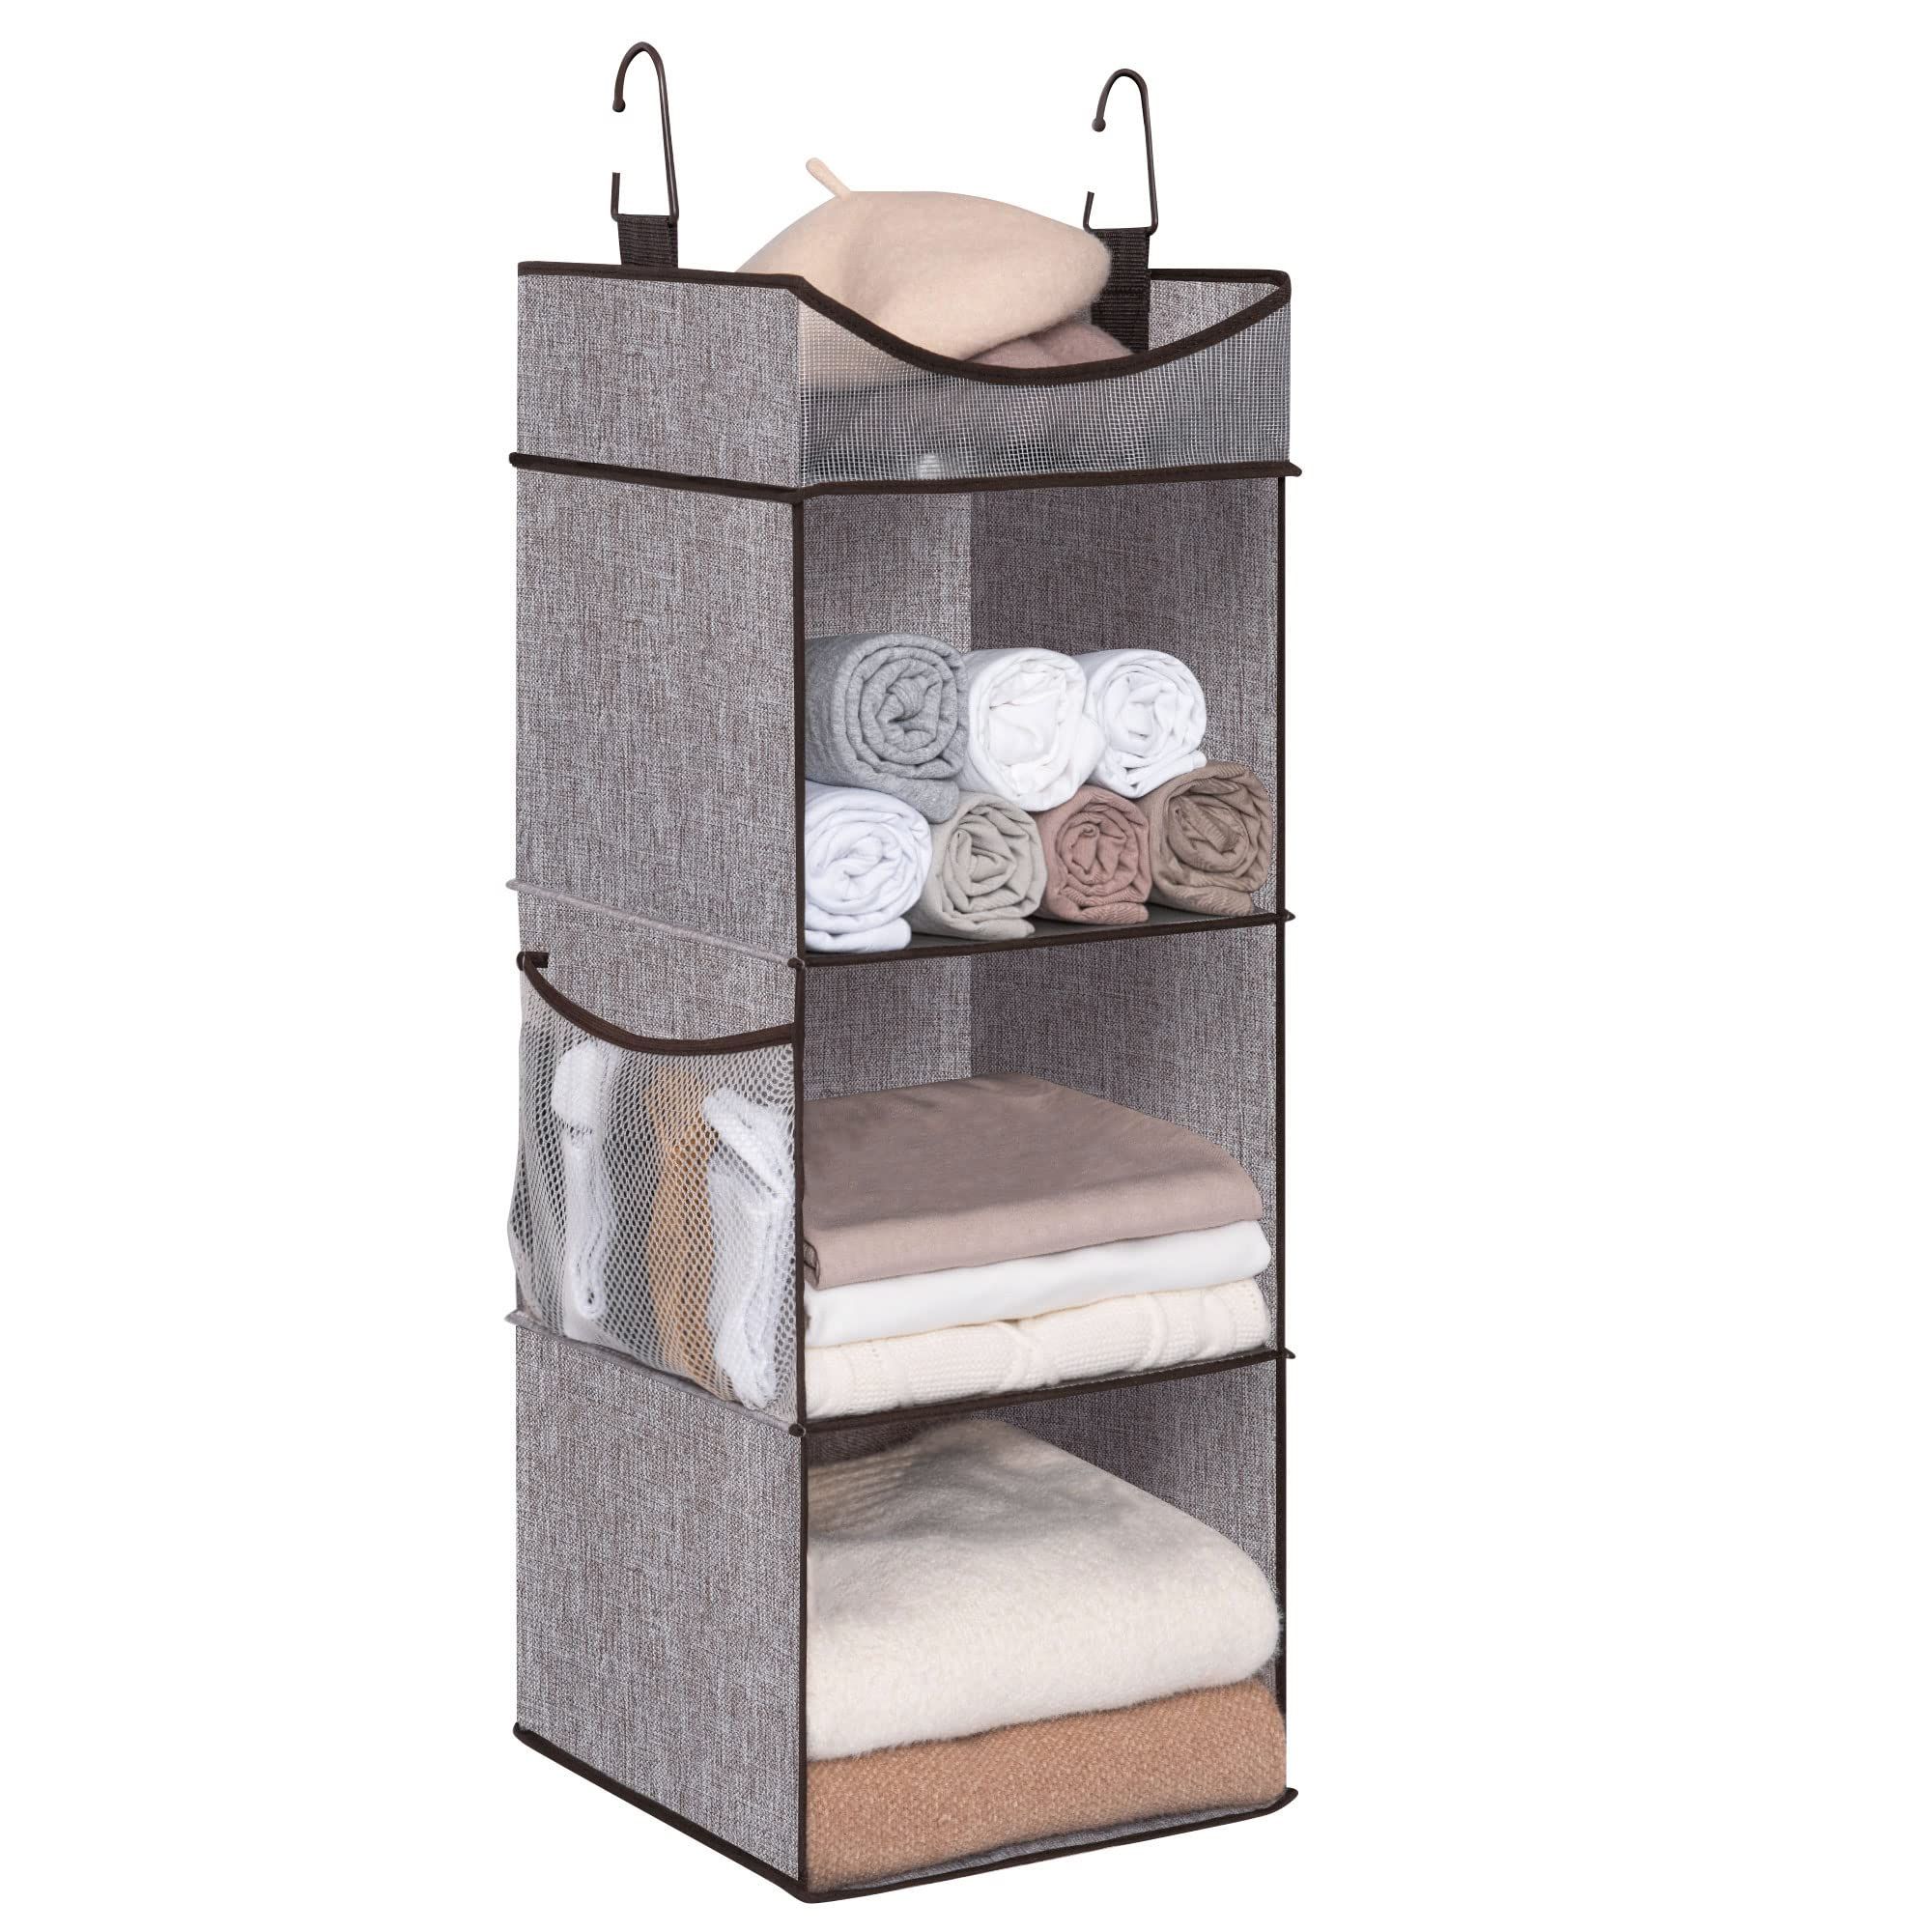 Most Current Amazon: Storageworks Hanging Closet Organizer, 3 Shelf Hanging Closet  Shelves With Top Shelf, 12" W X 12" D X 35 ¼"h, Extra Large Space, Mixing  Of Brown And Gray : Home & Kitchen For 3 Shelf Hanging Shelves Wardrobes (View 6 of 10)